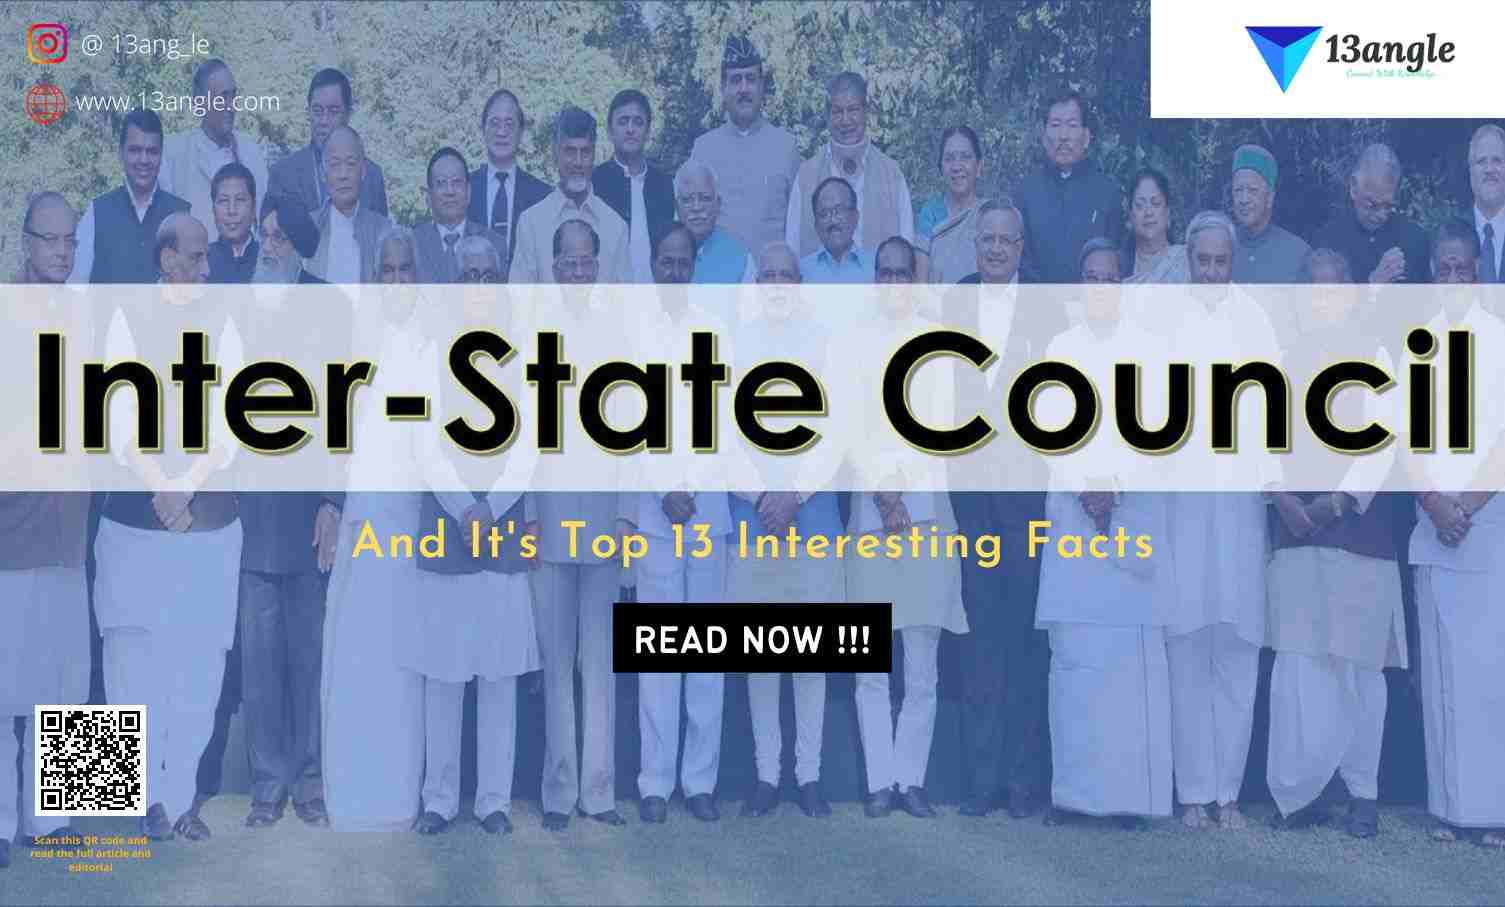 The Inter-State Council And It's Top 13 Interesting Facts- 13ange.com